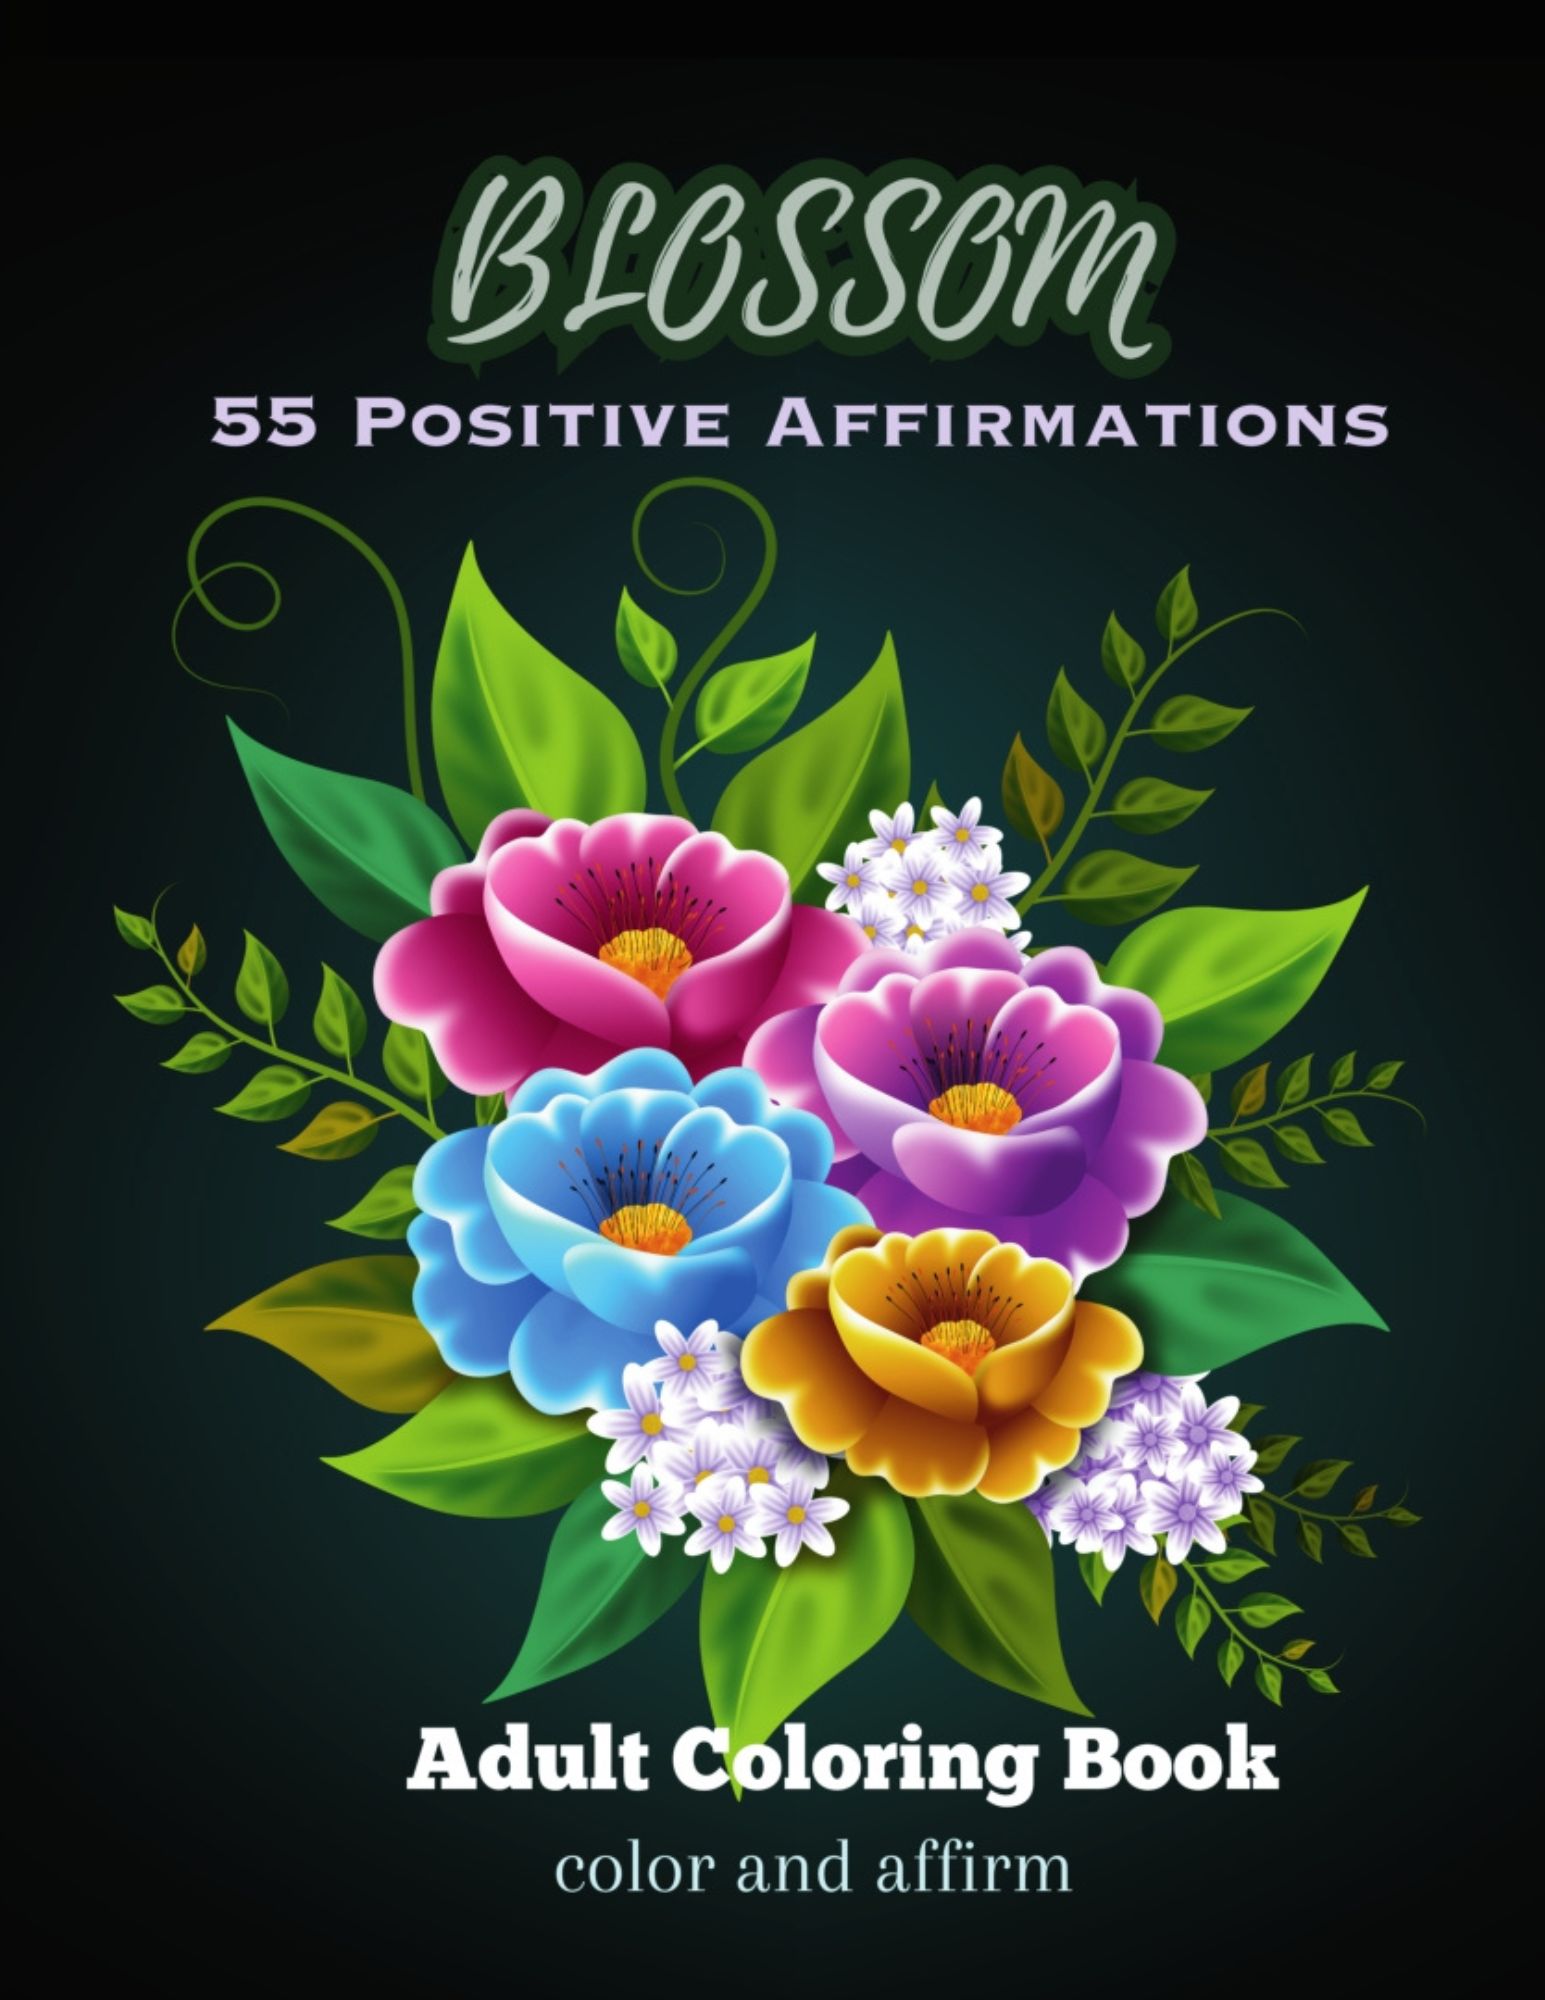 Blossom with 55 positive affirmations adult coloring book